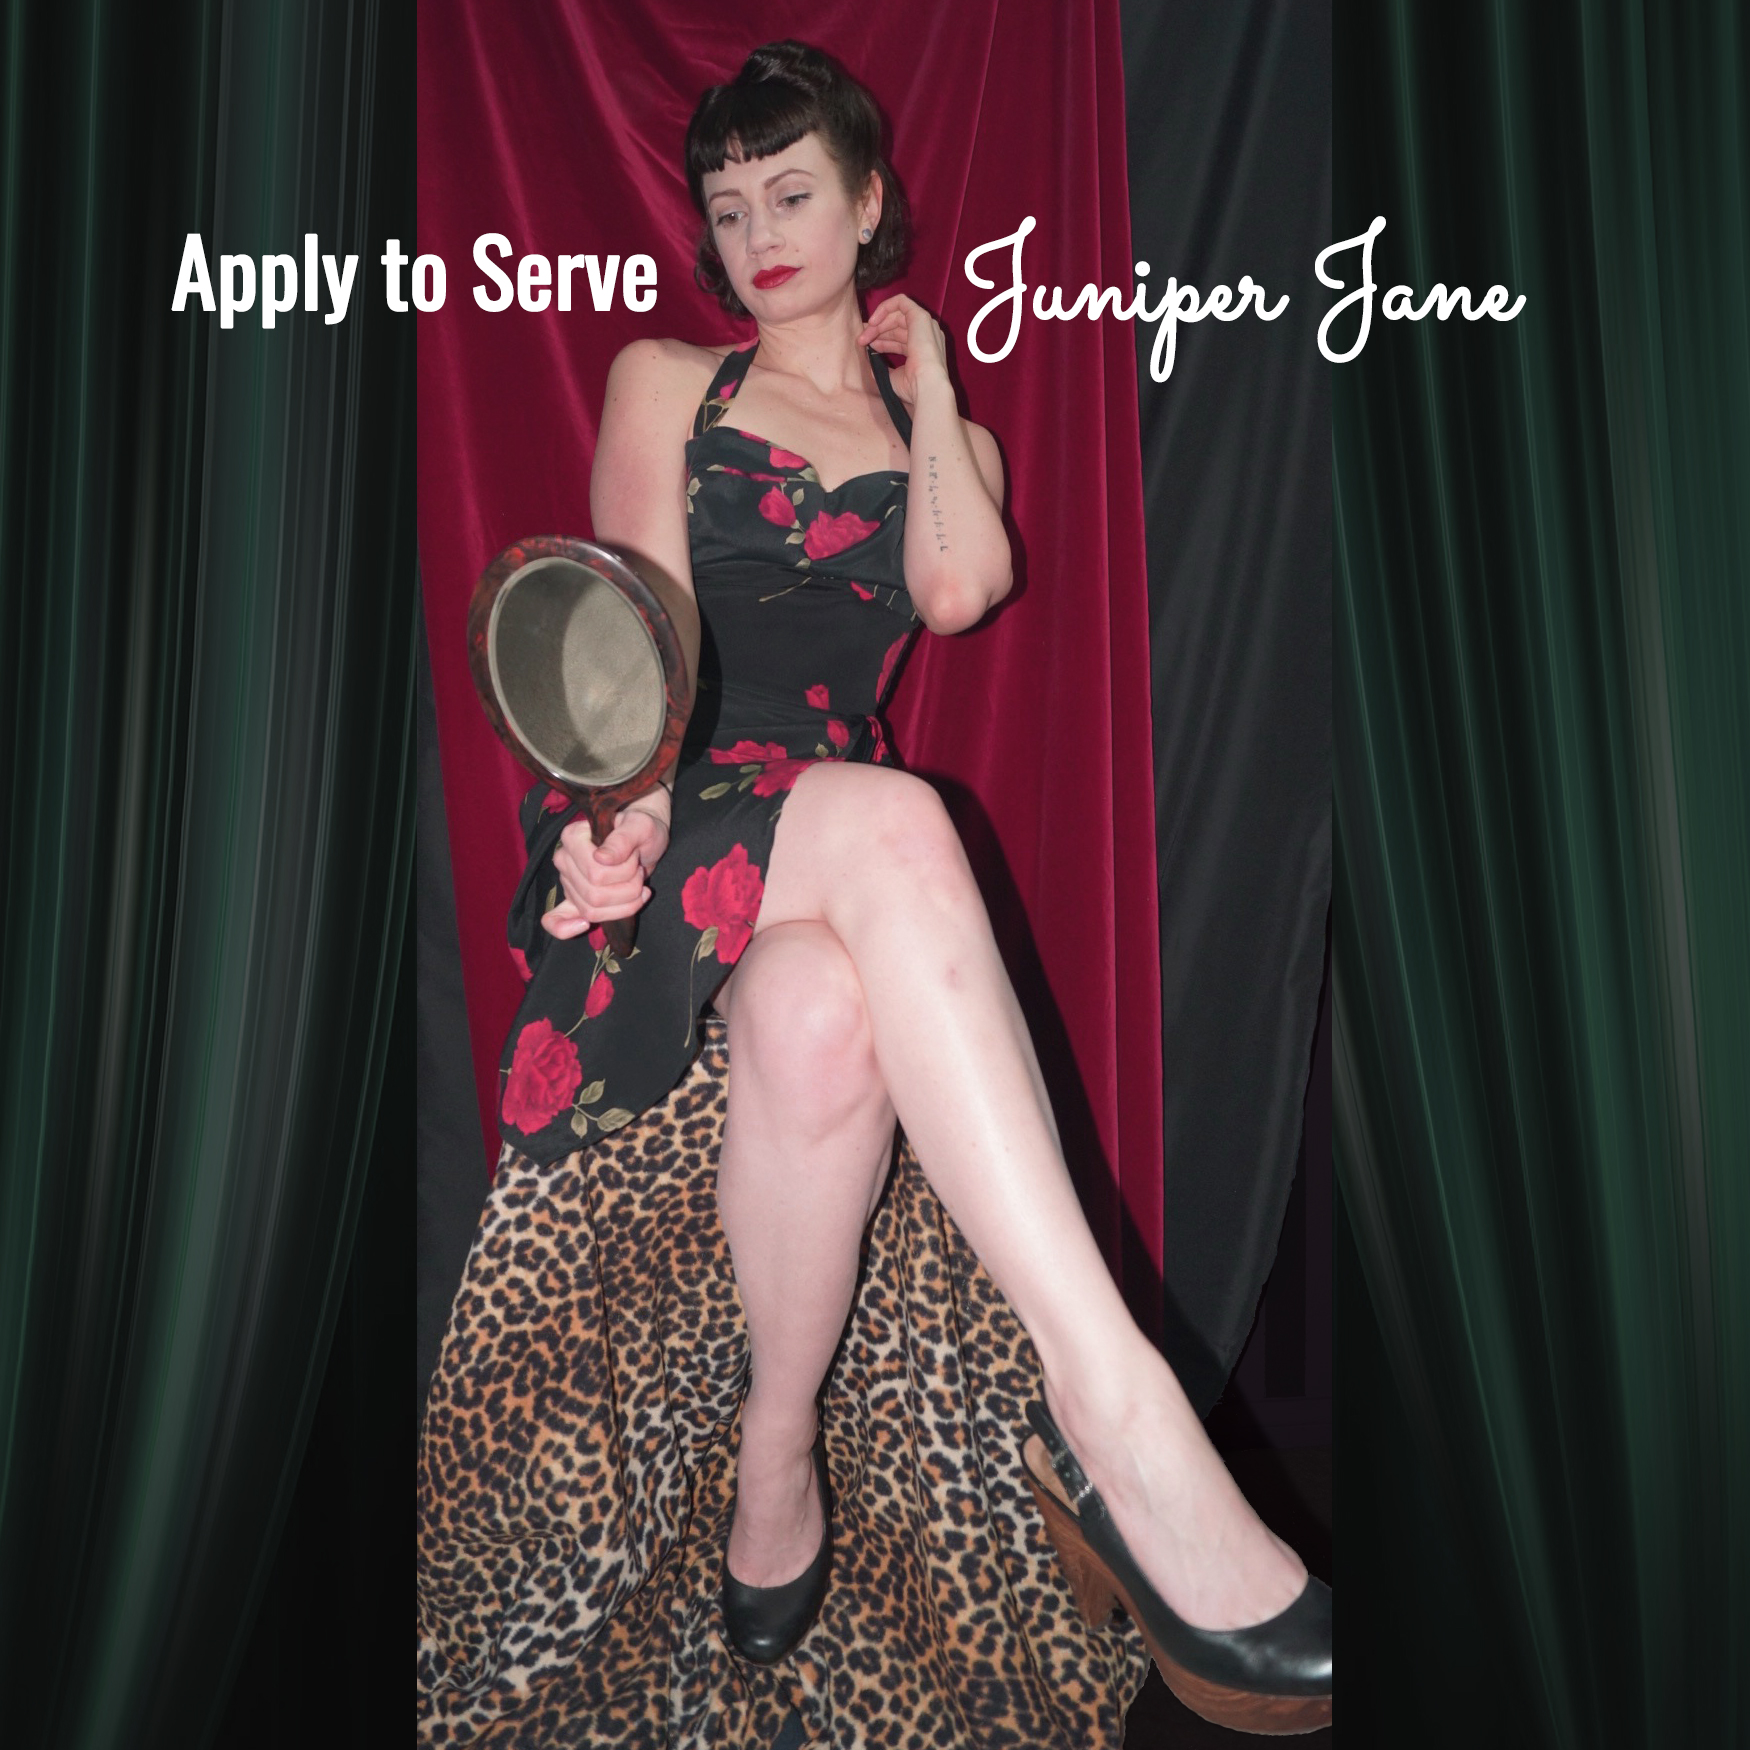 Apply to Serve or be Owned by Juniper Jane